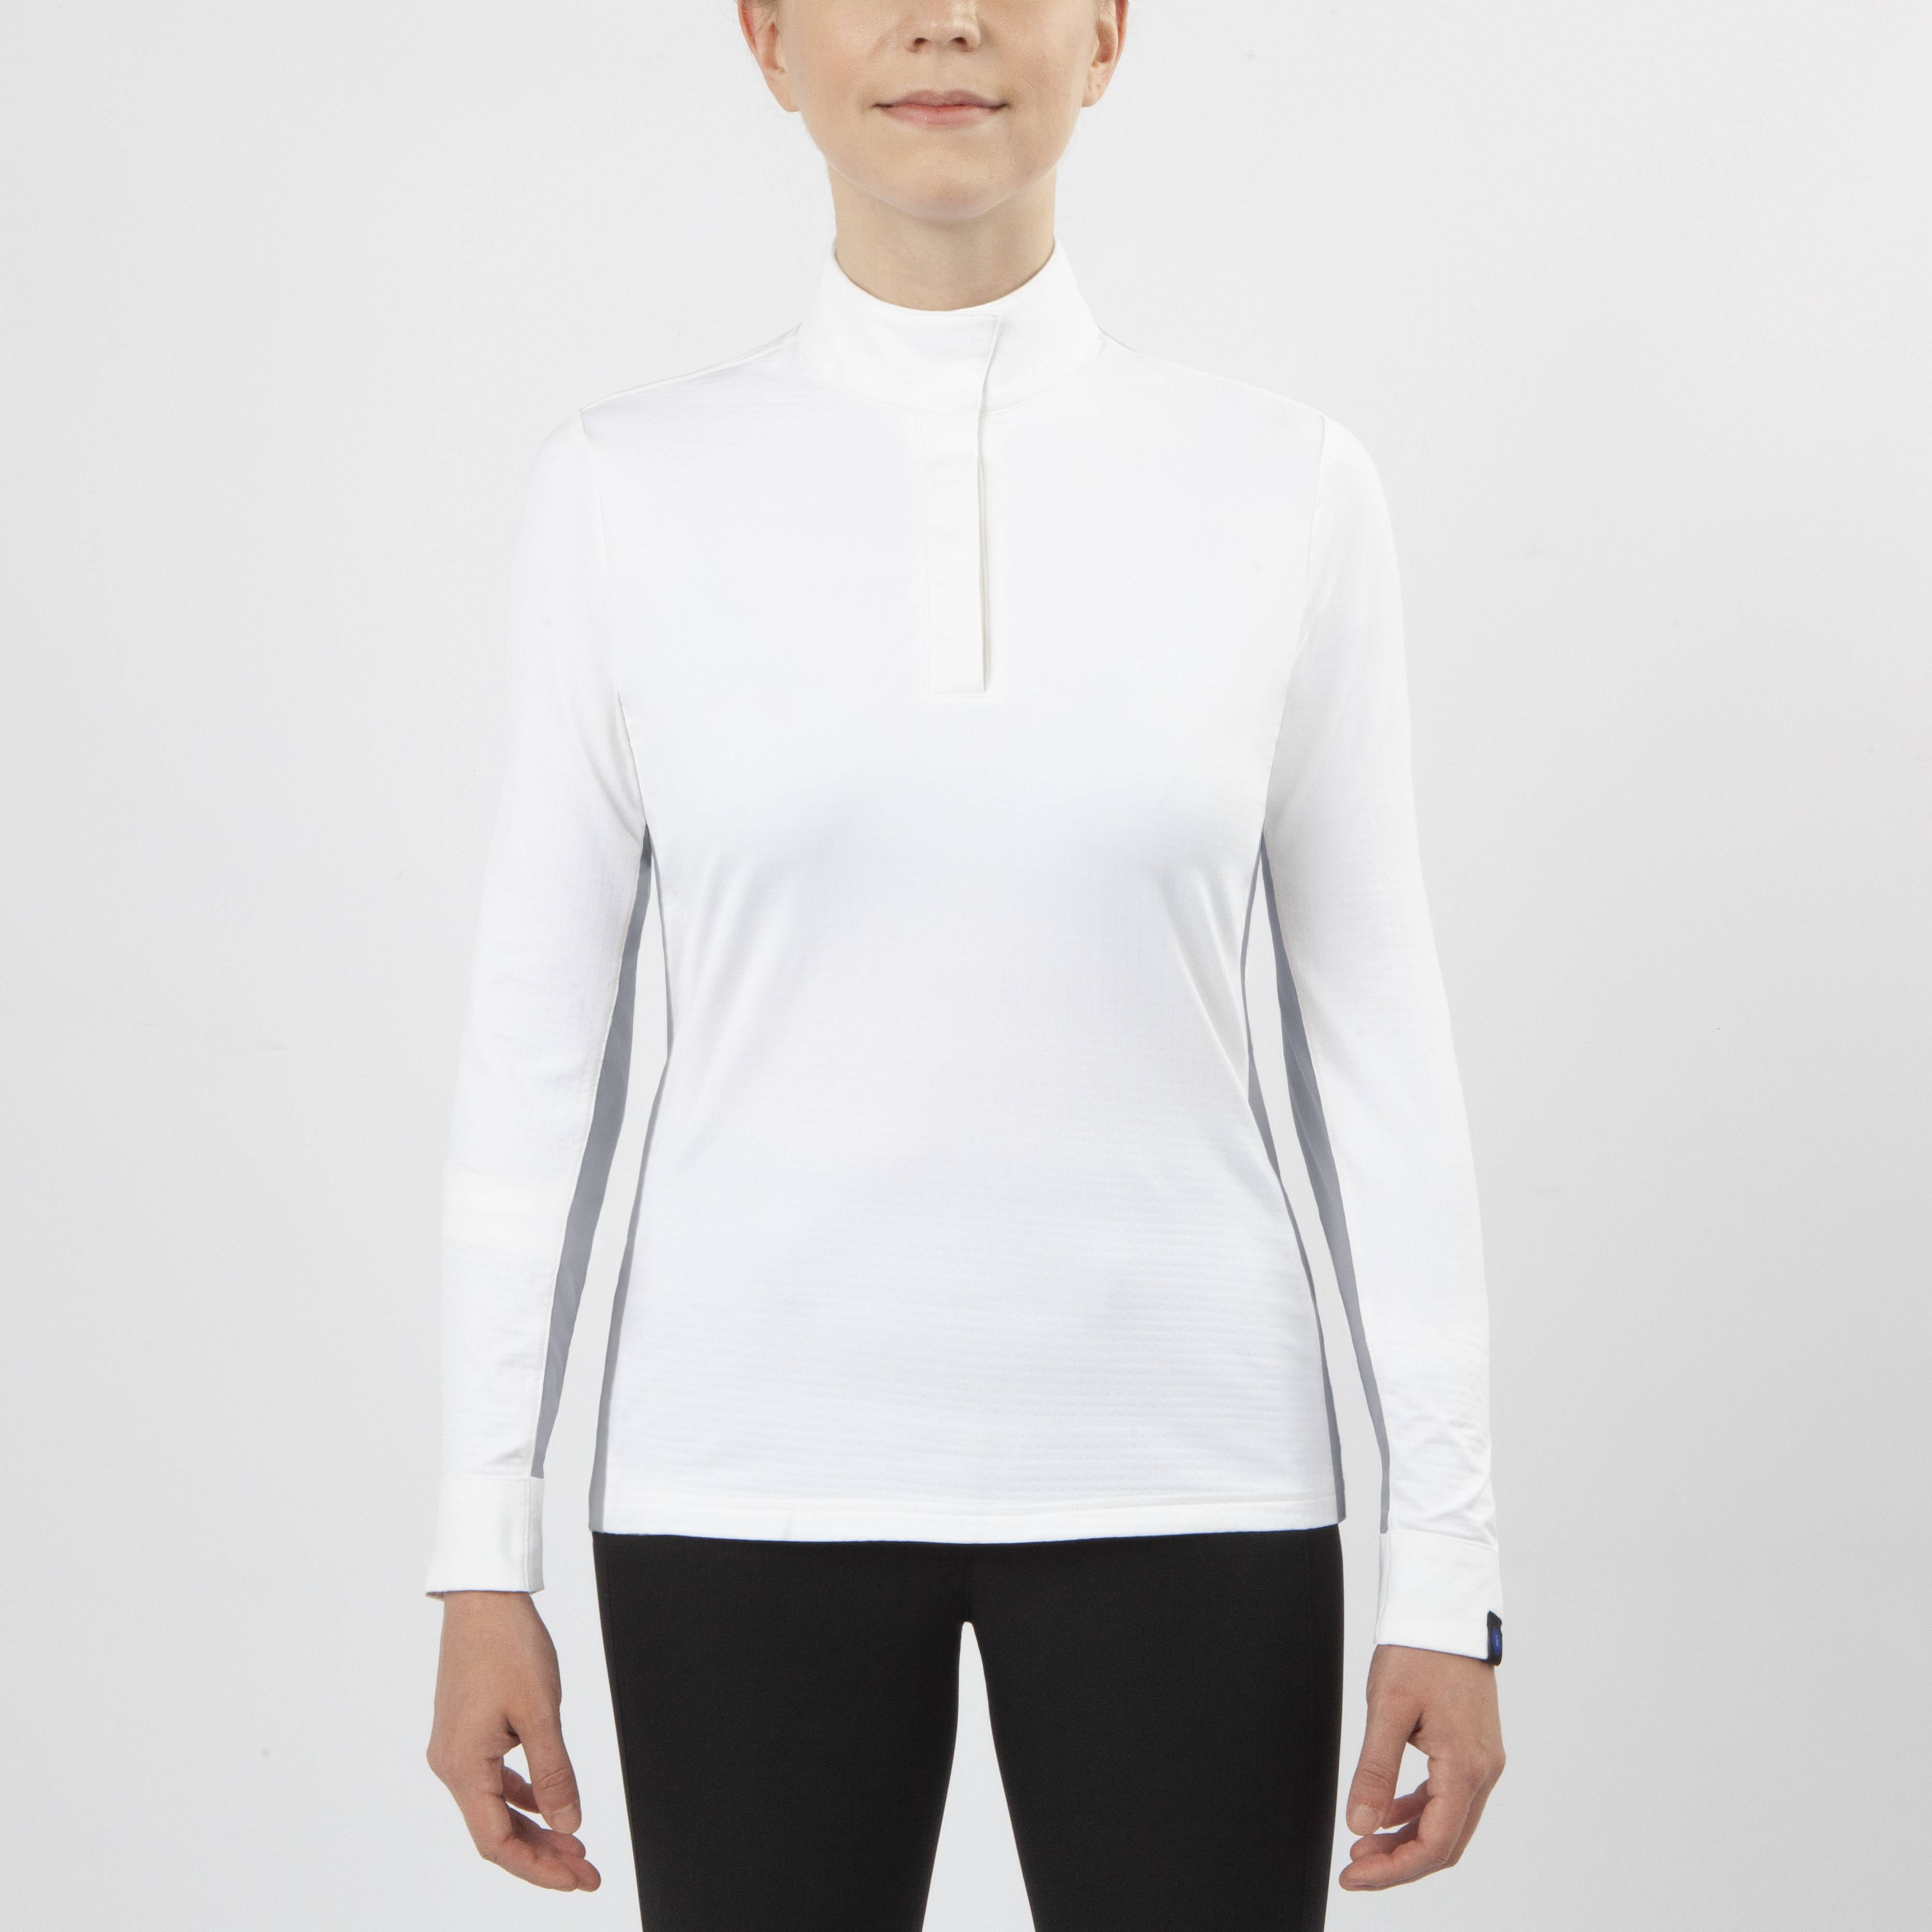 NEW Irideon CoolDown IceFil Long Sleeve Jersey Riding Shirt for Hot Weather 